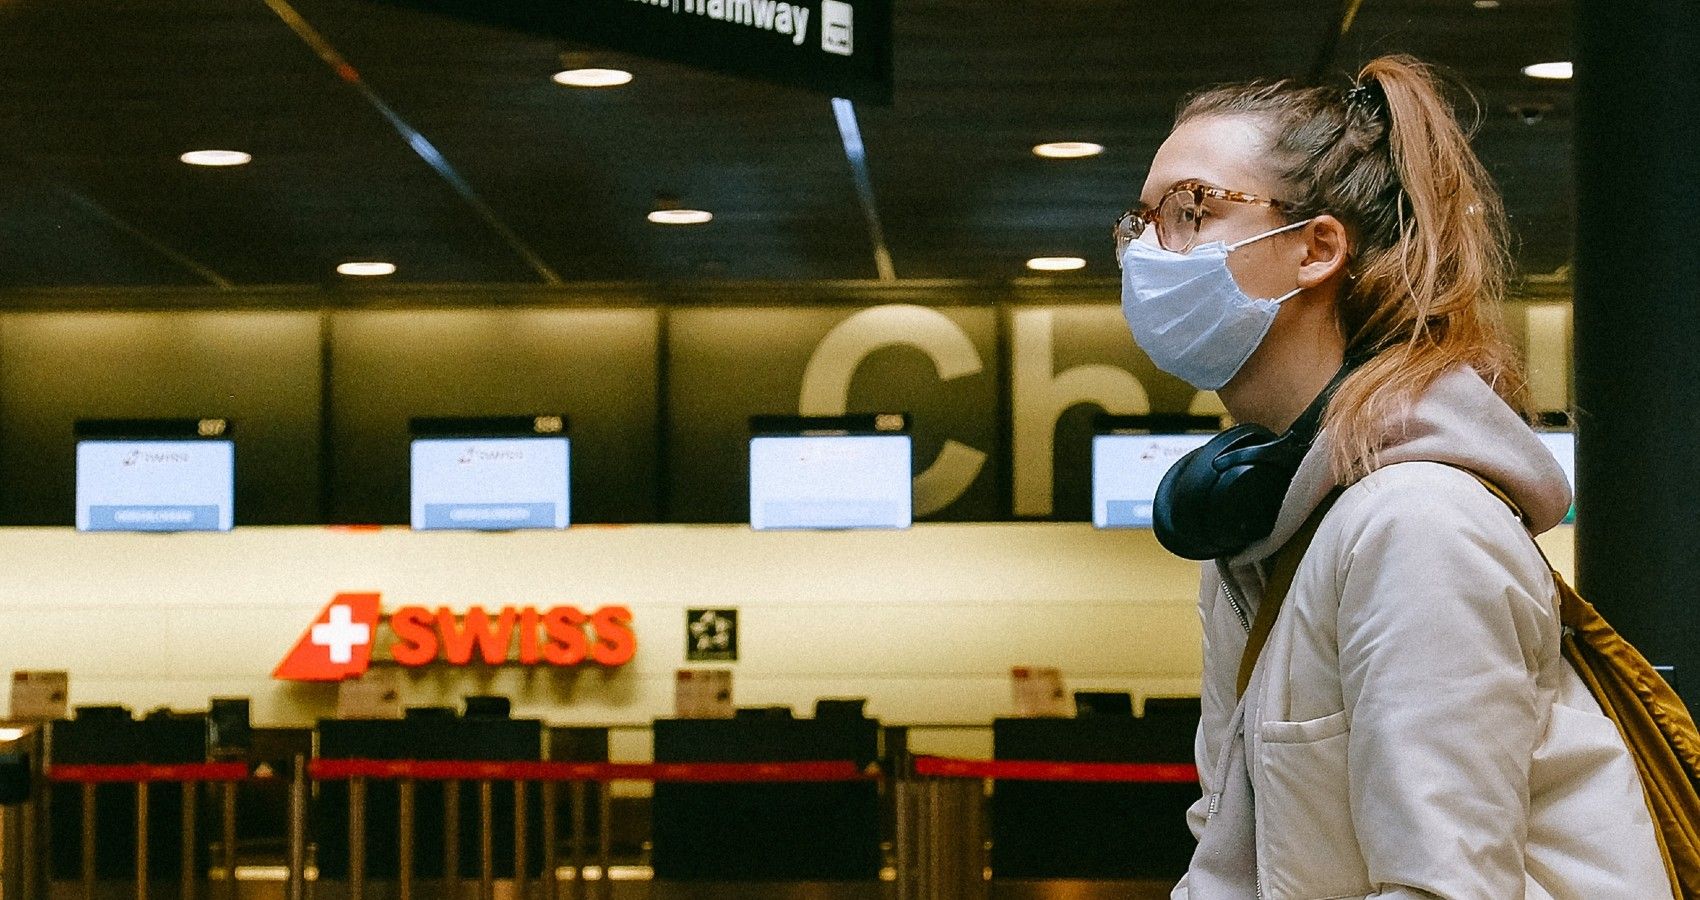 A woman at the airport with a face mask on